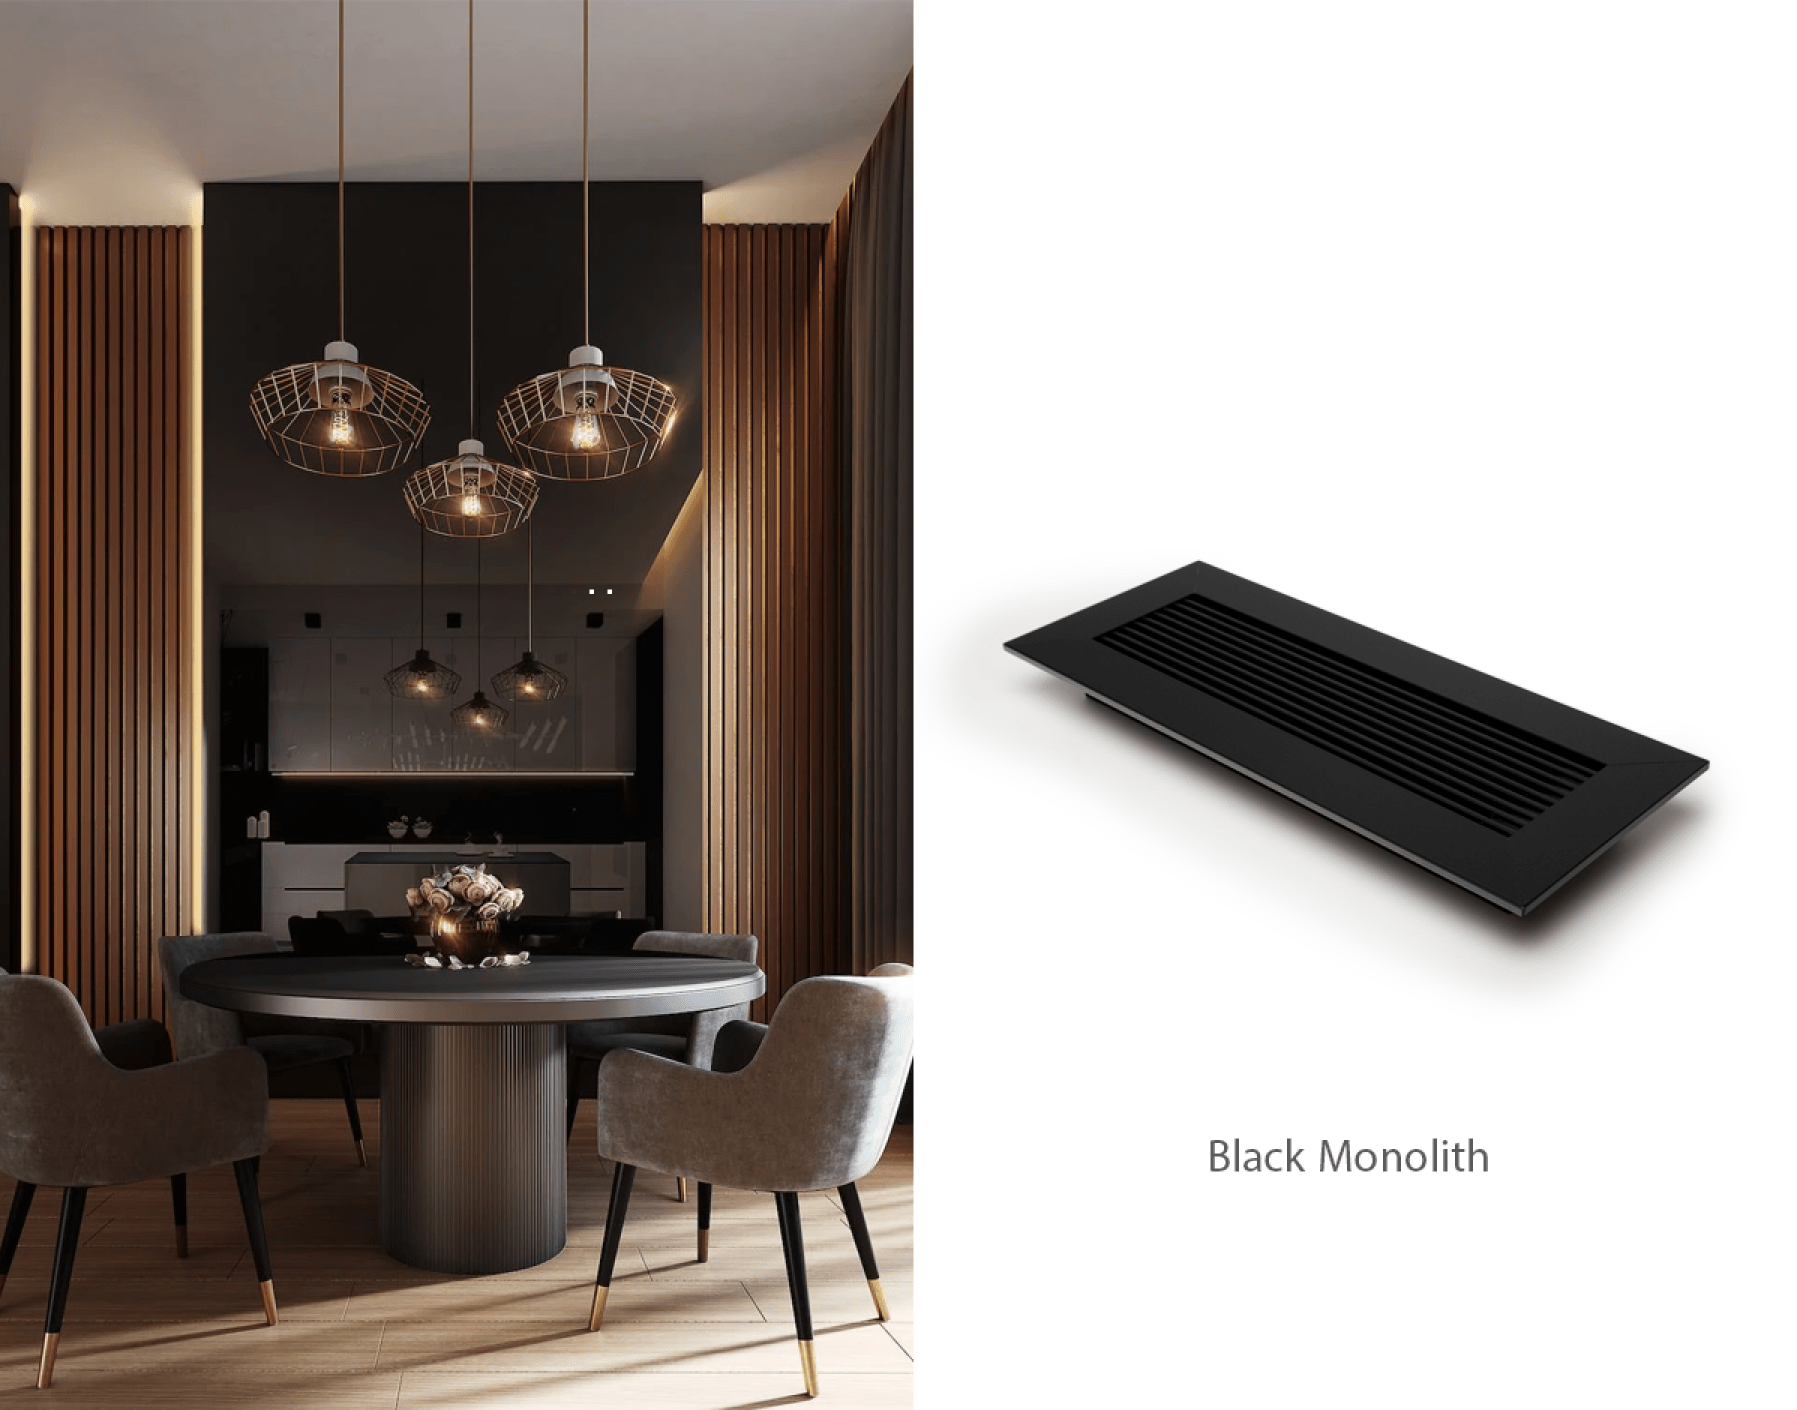 Luxury dining room beside Black Monolith kul grilles vent cover